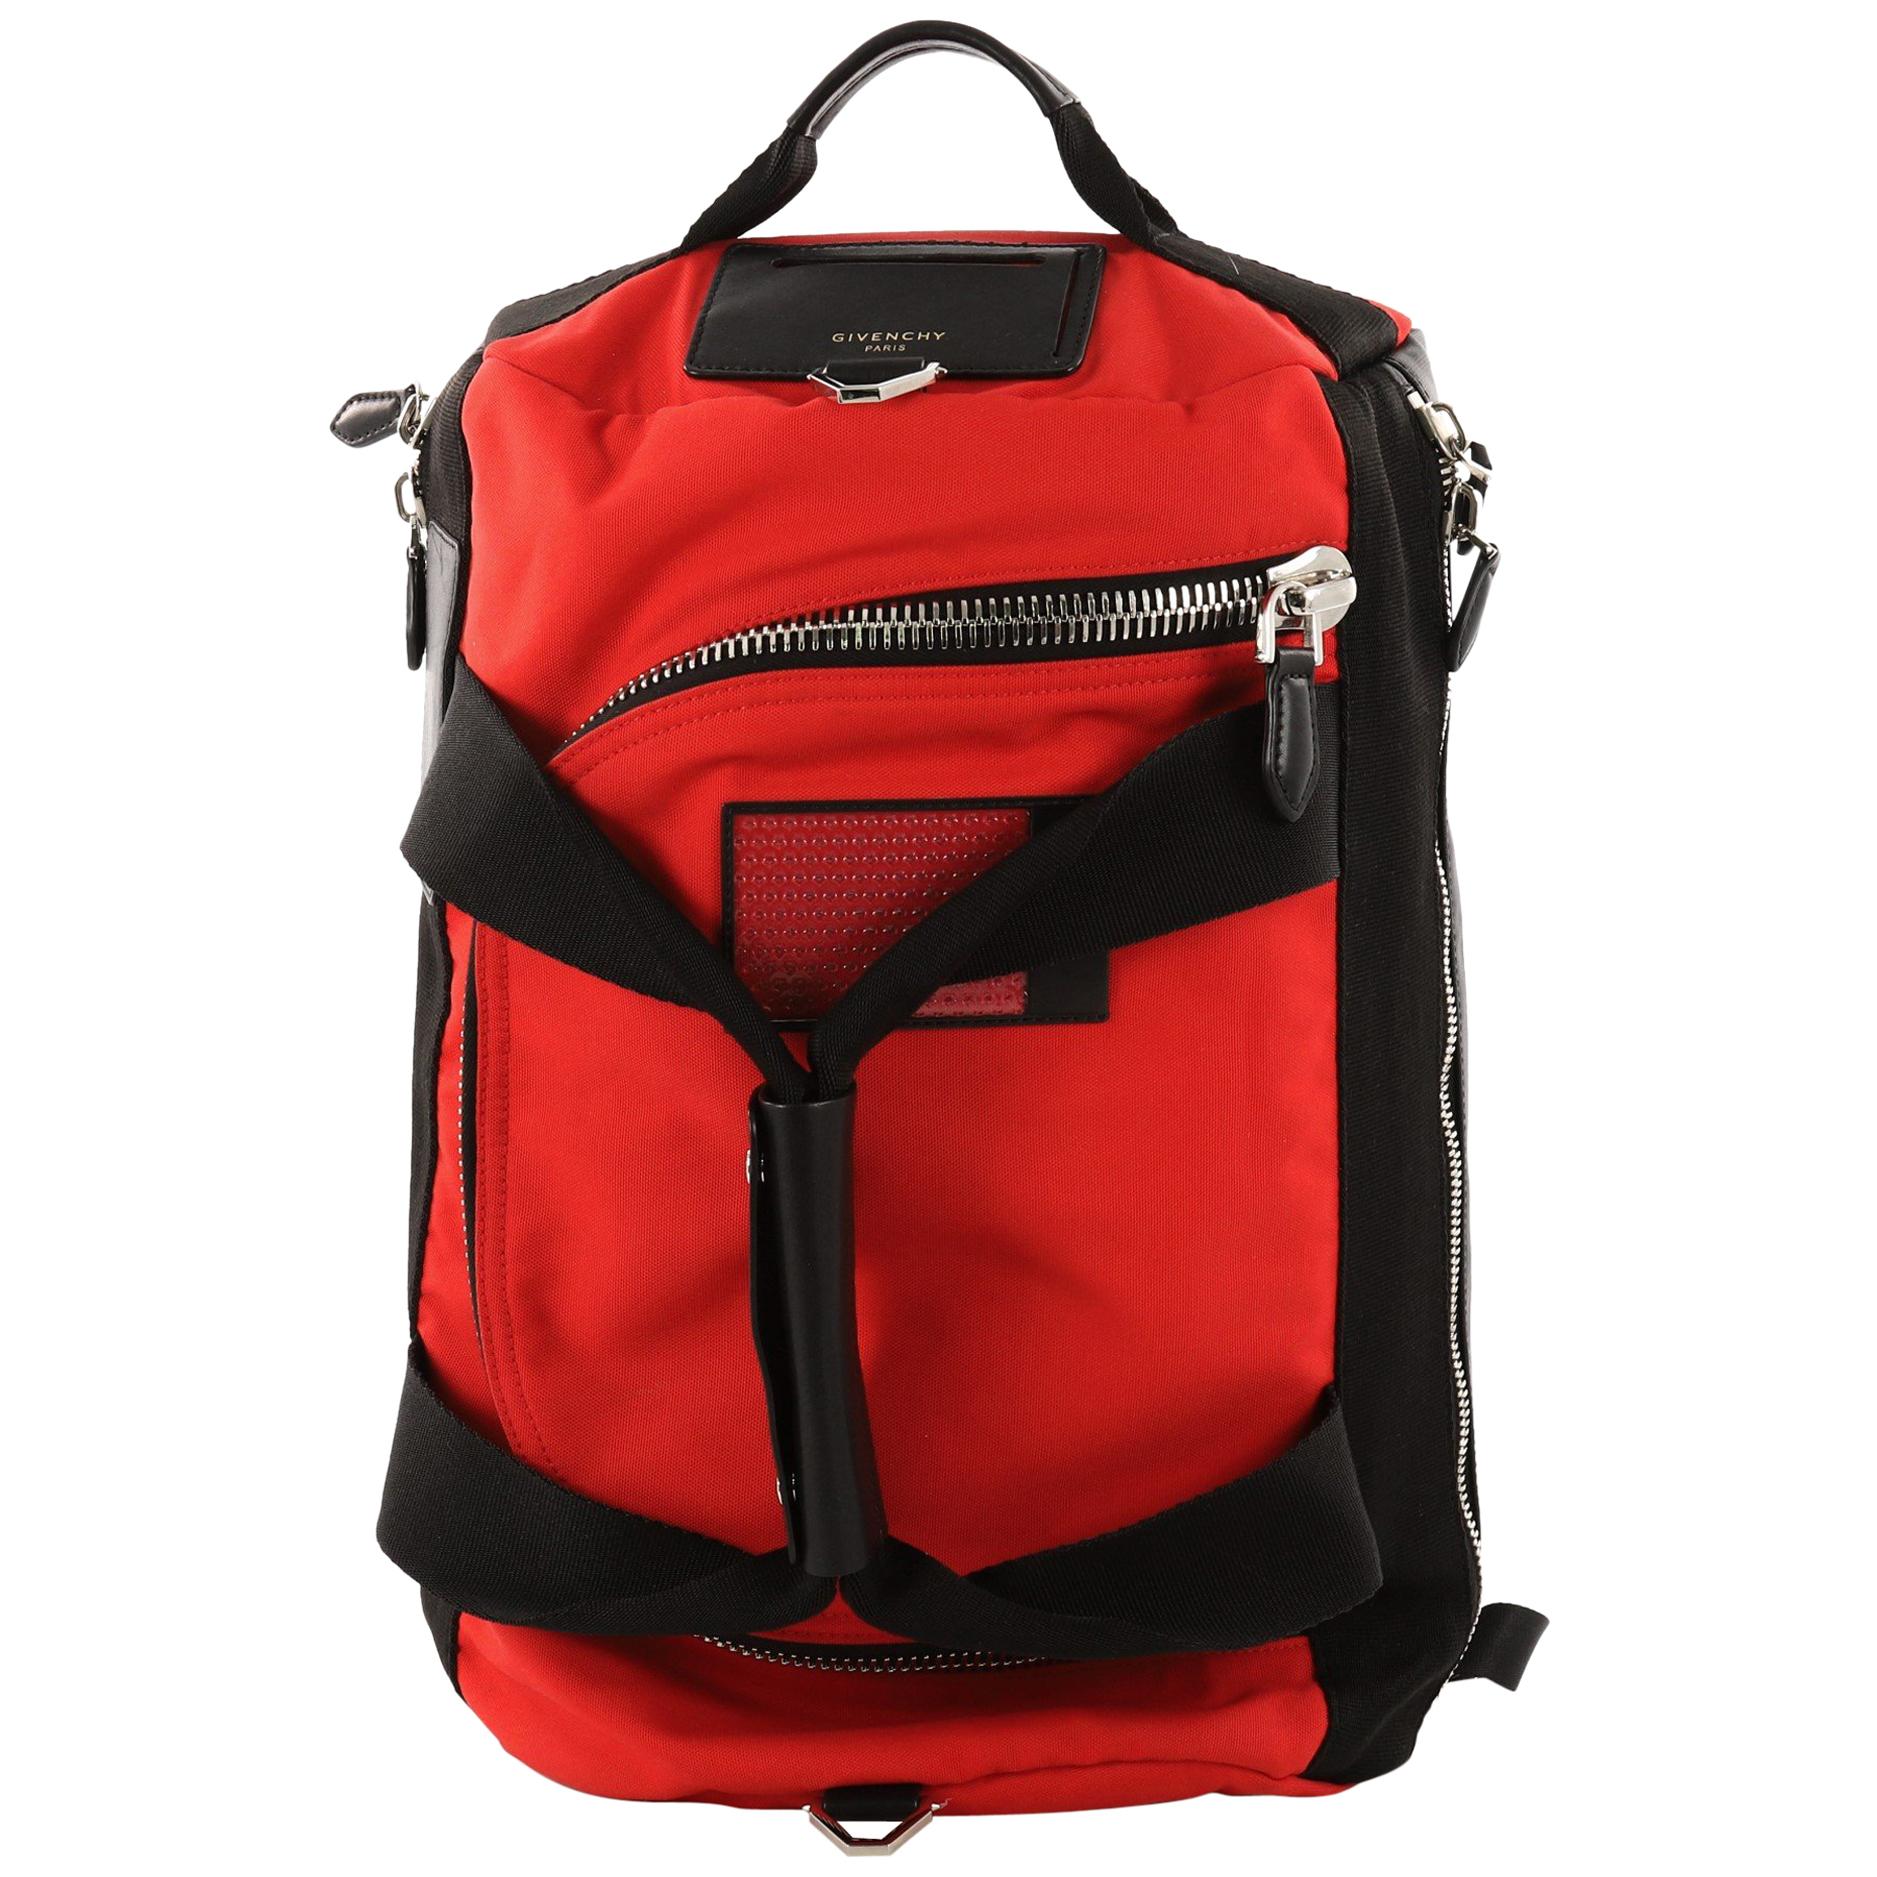 Givenchy Convertible Duffle Backpack Nylon and Leather